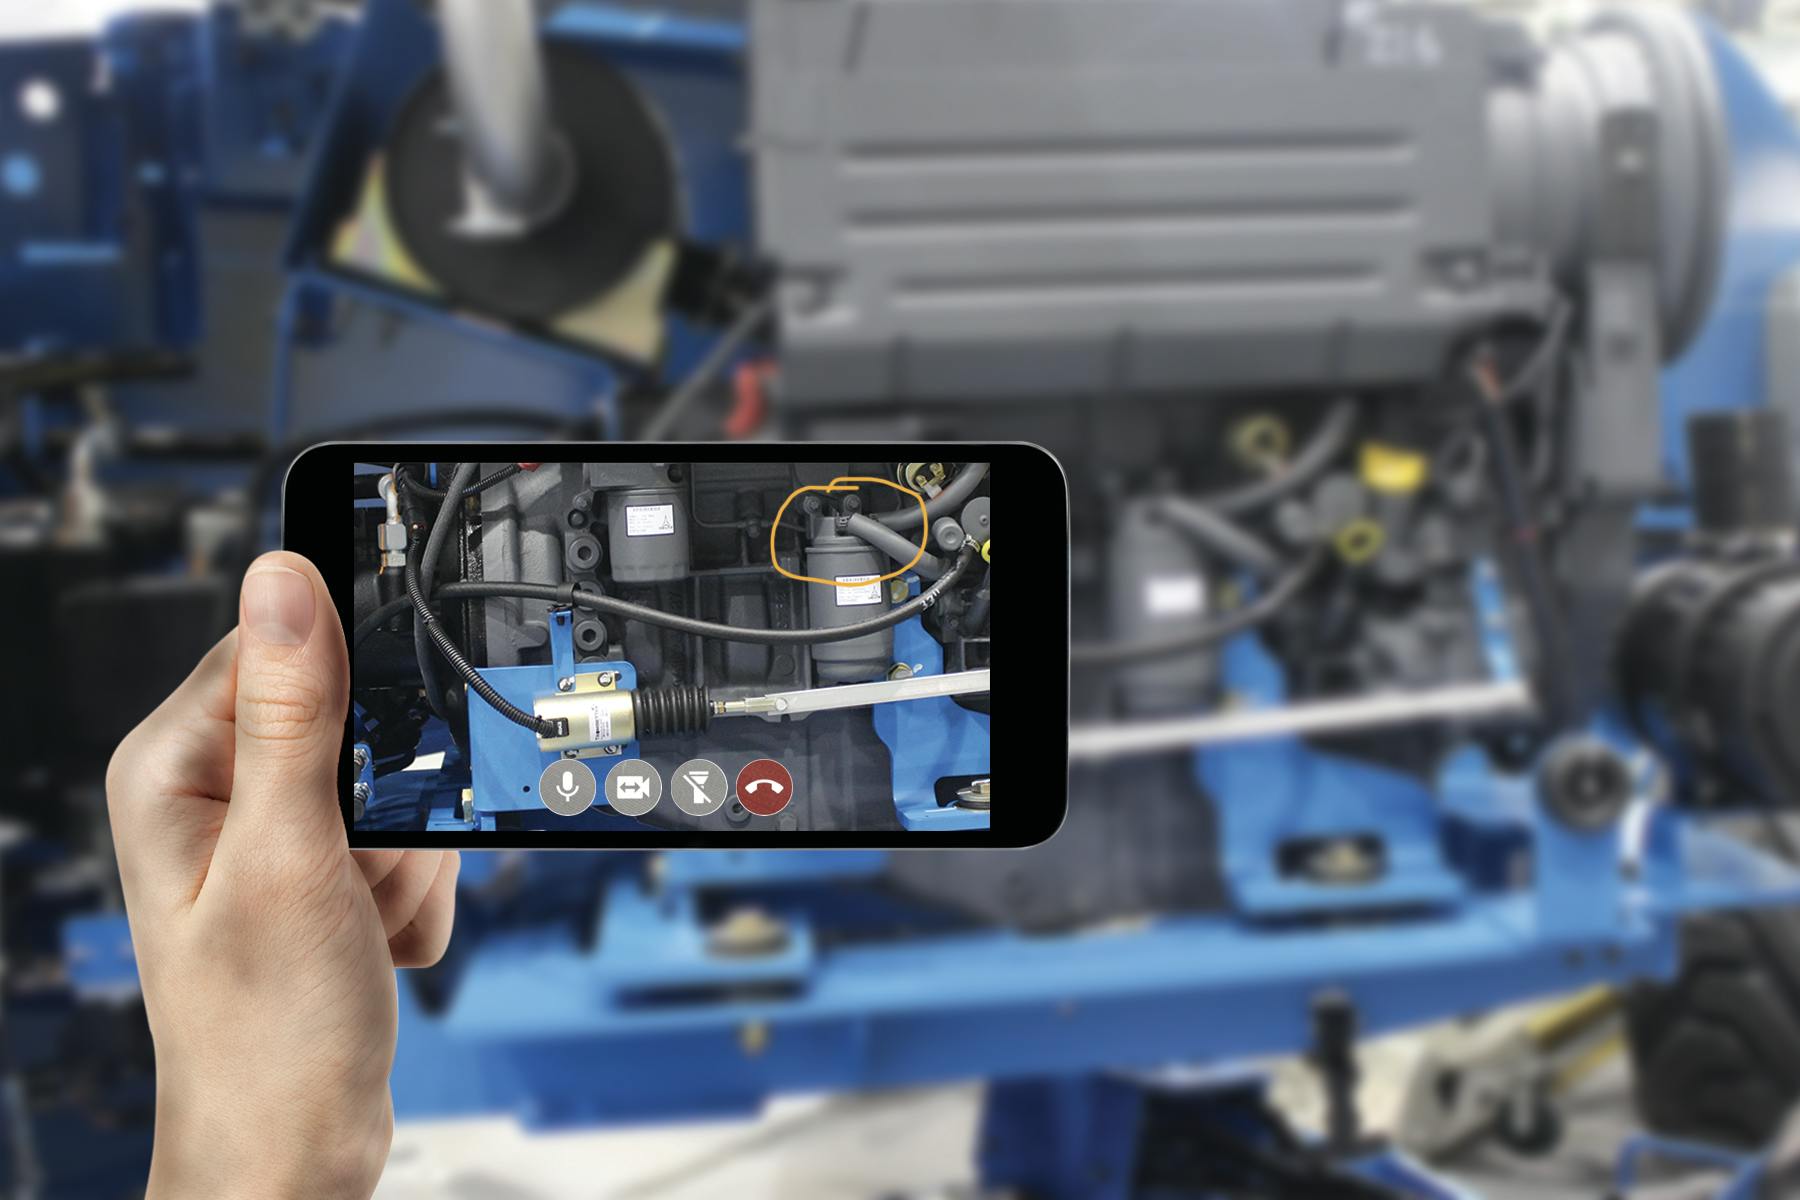 New Genie App Uses Live Video to Help Experts Troubleshoot Remotely | Construction News